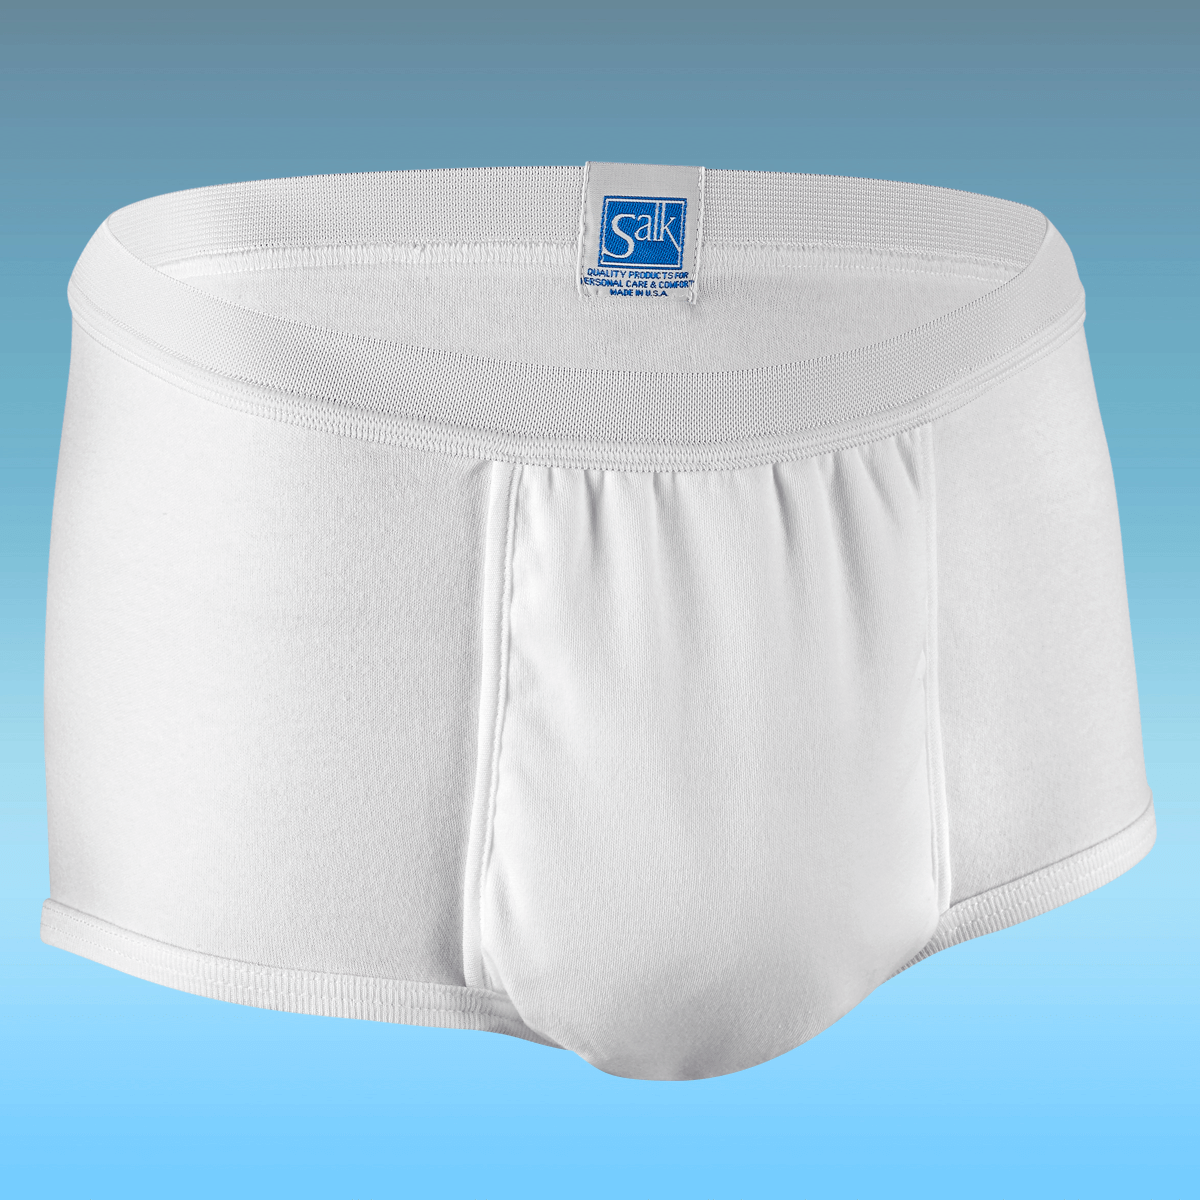 Disposable Underwear For Incontinence Sales Prices | sateasia.holy.jp